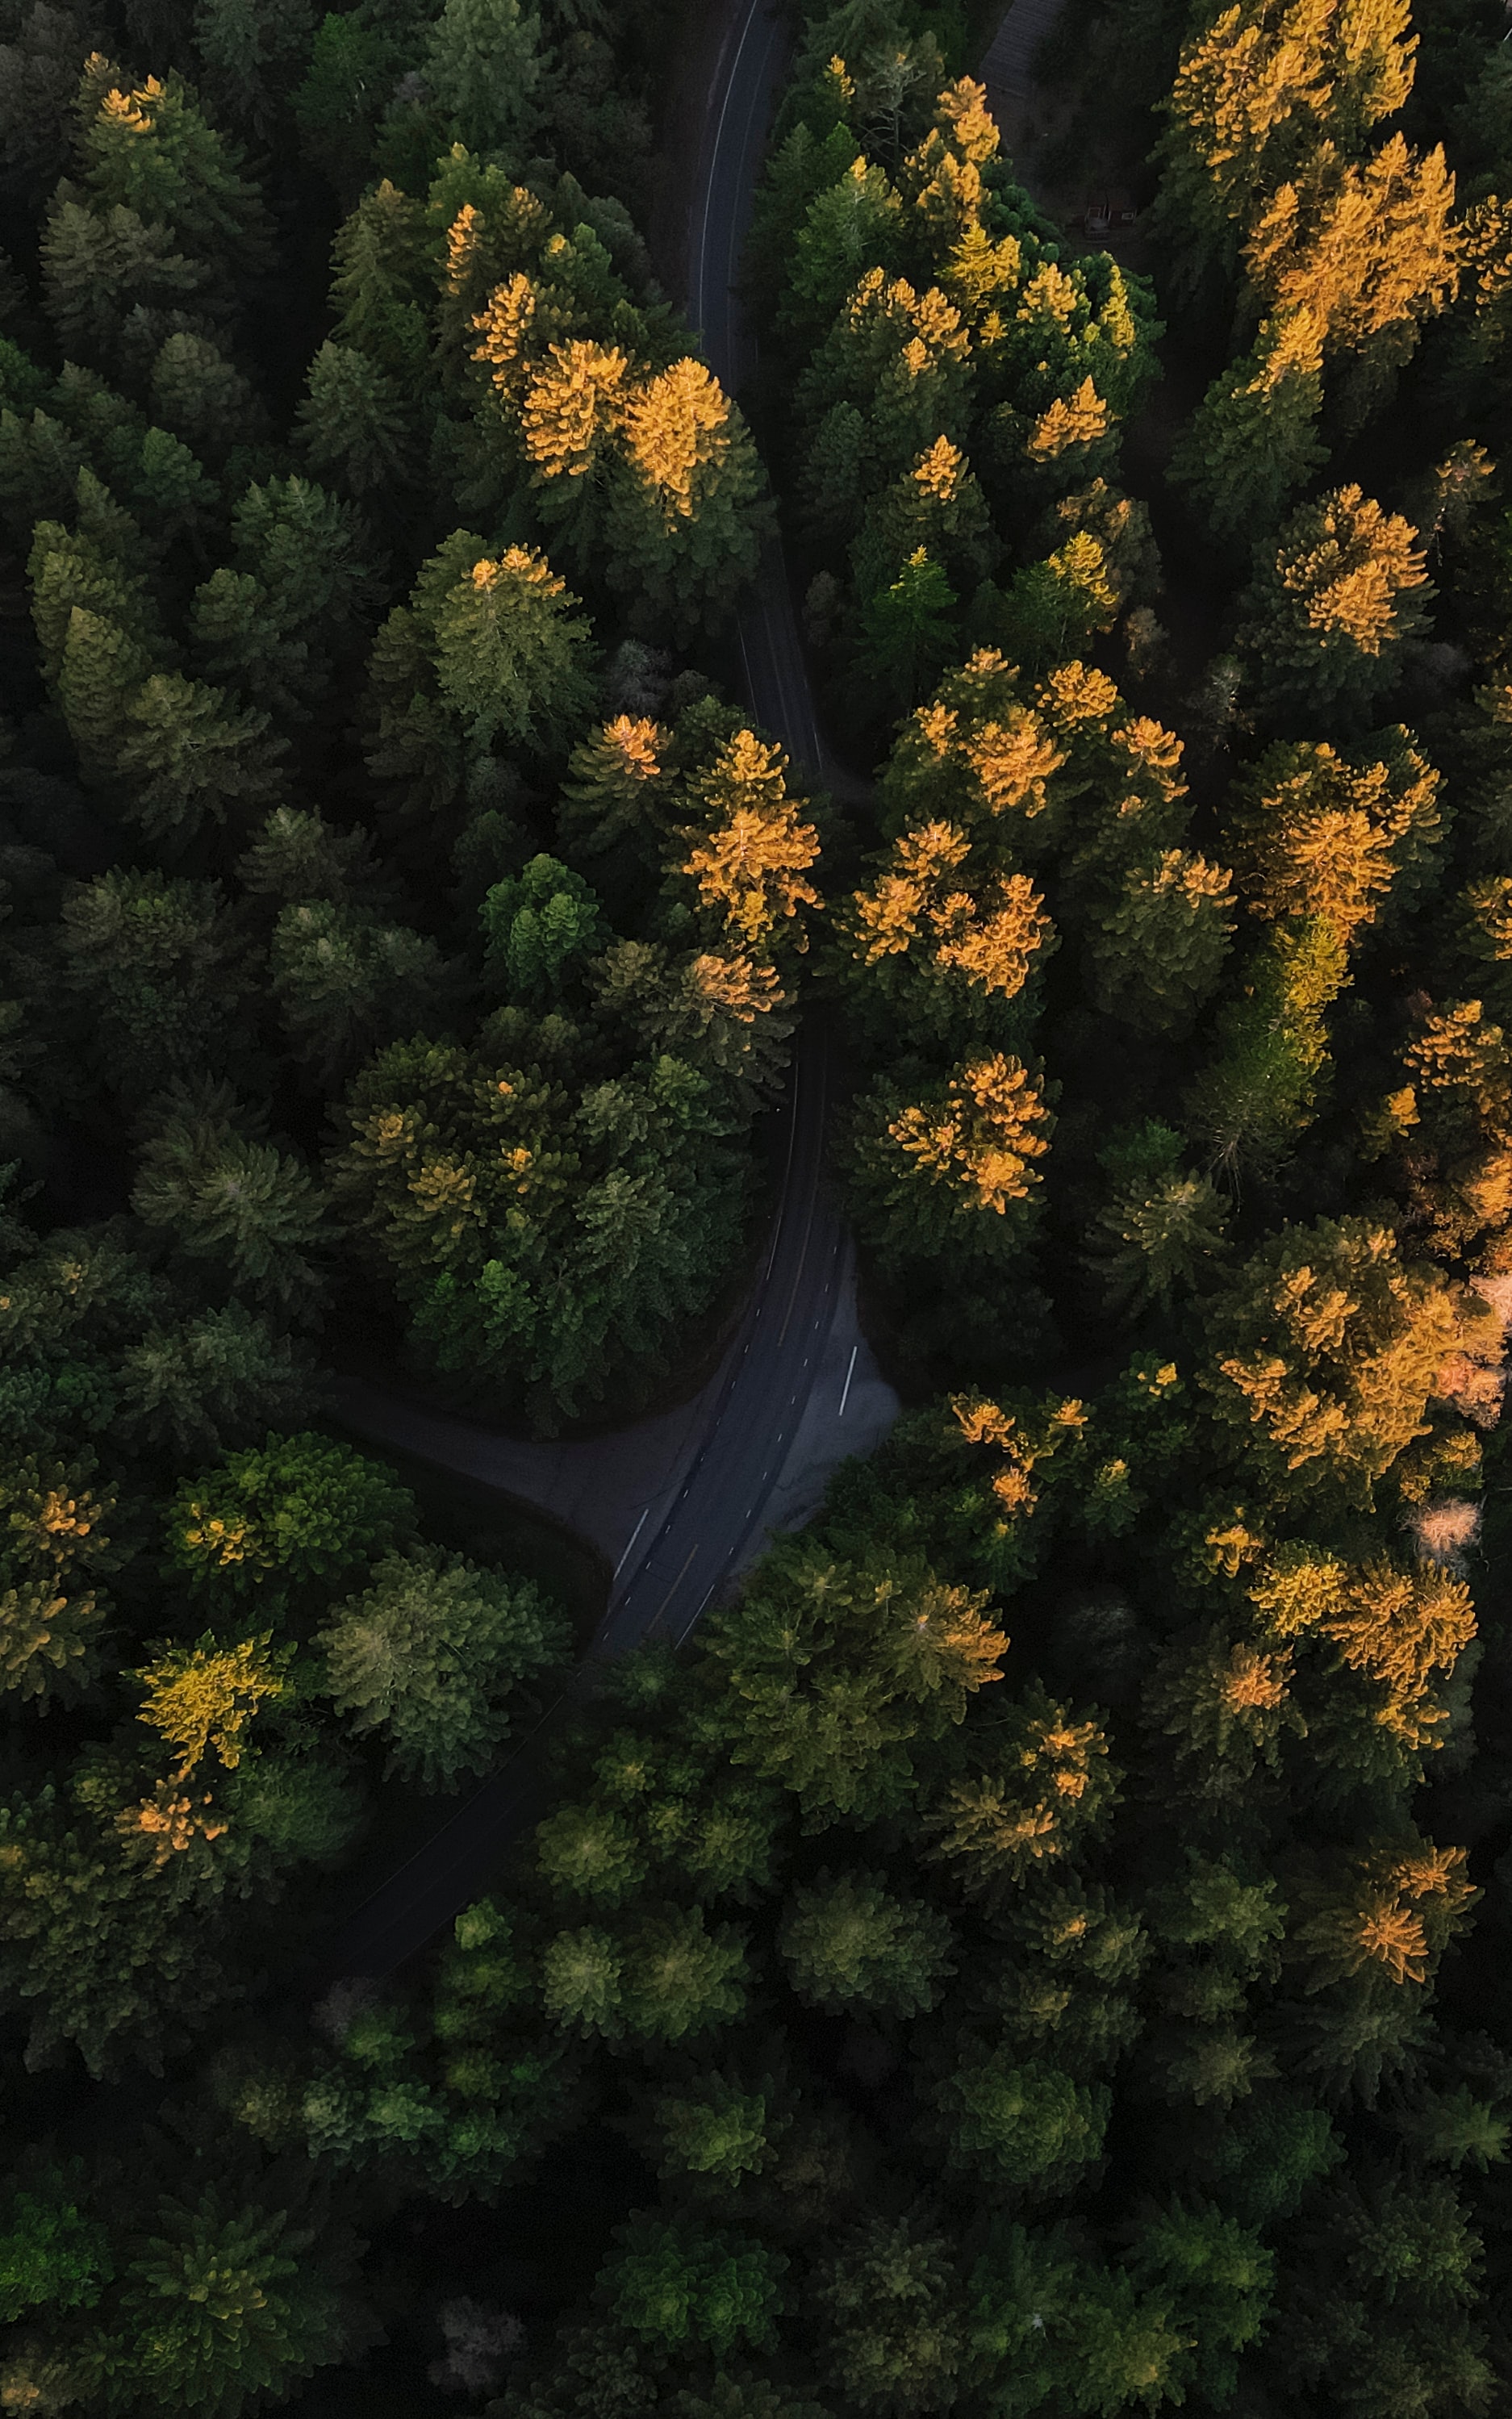 view from above, nature, trees, road, forest, winding, sinuous 4K Ultra